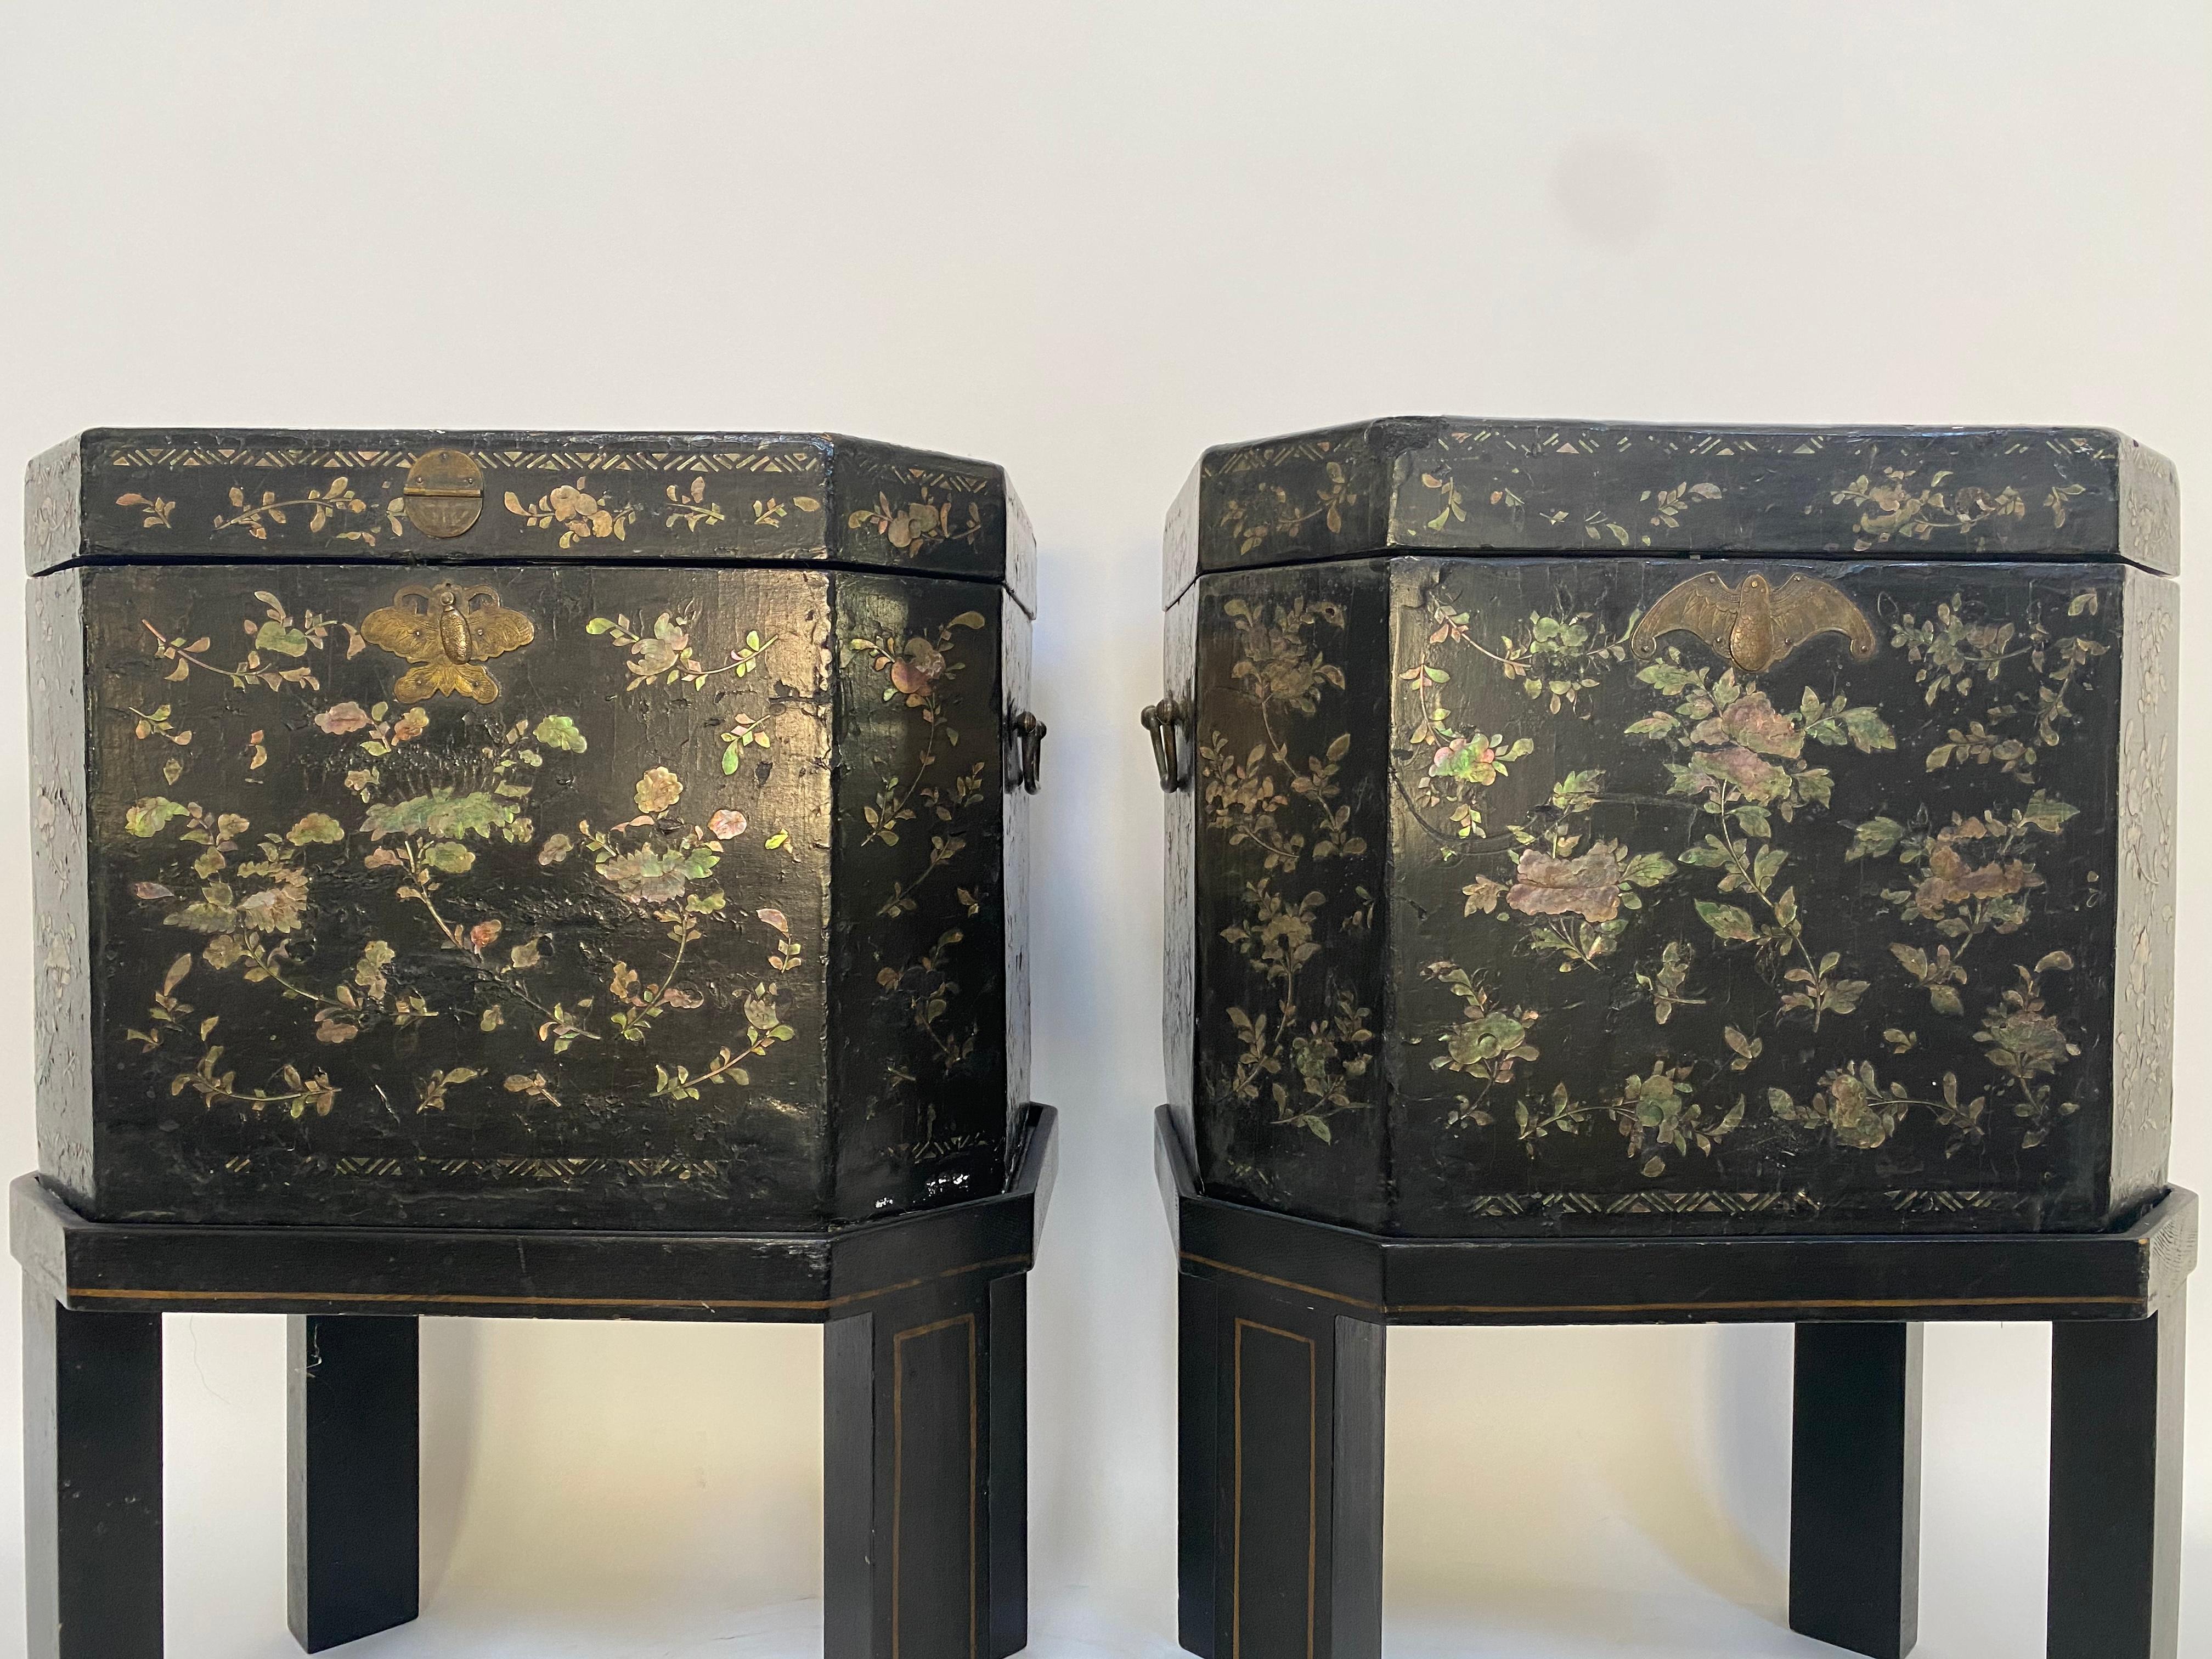 Hand-Crafted 19th Century Unique Pair of Shell Inlaid Black Lacquer Big Chinese Tea Caddies For Sale